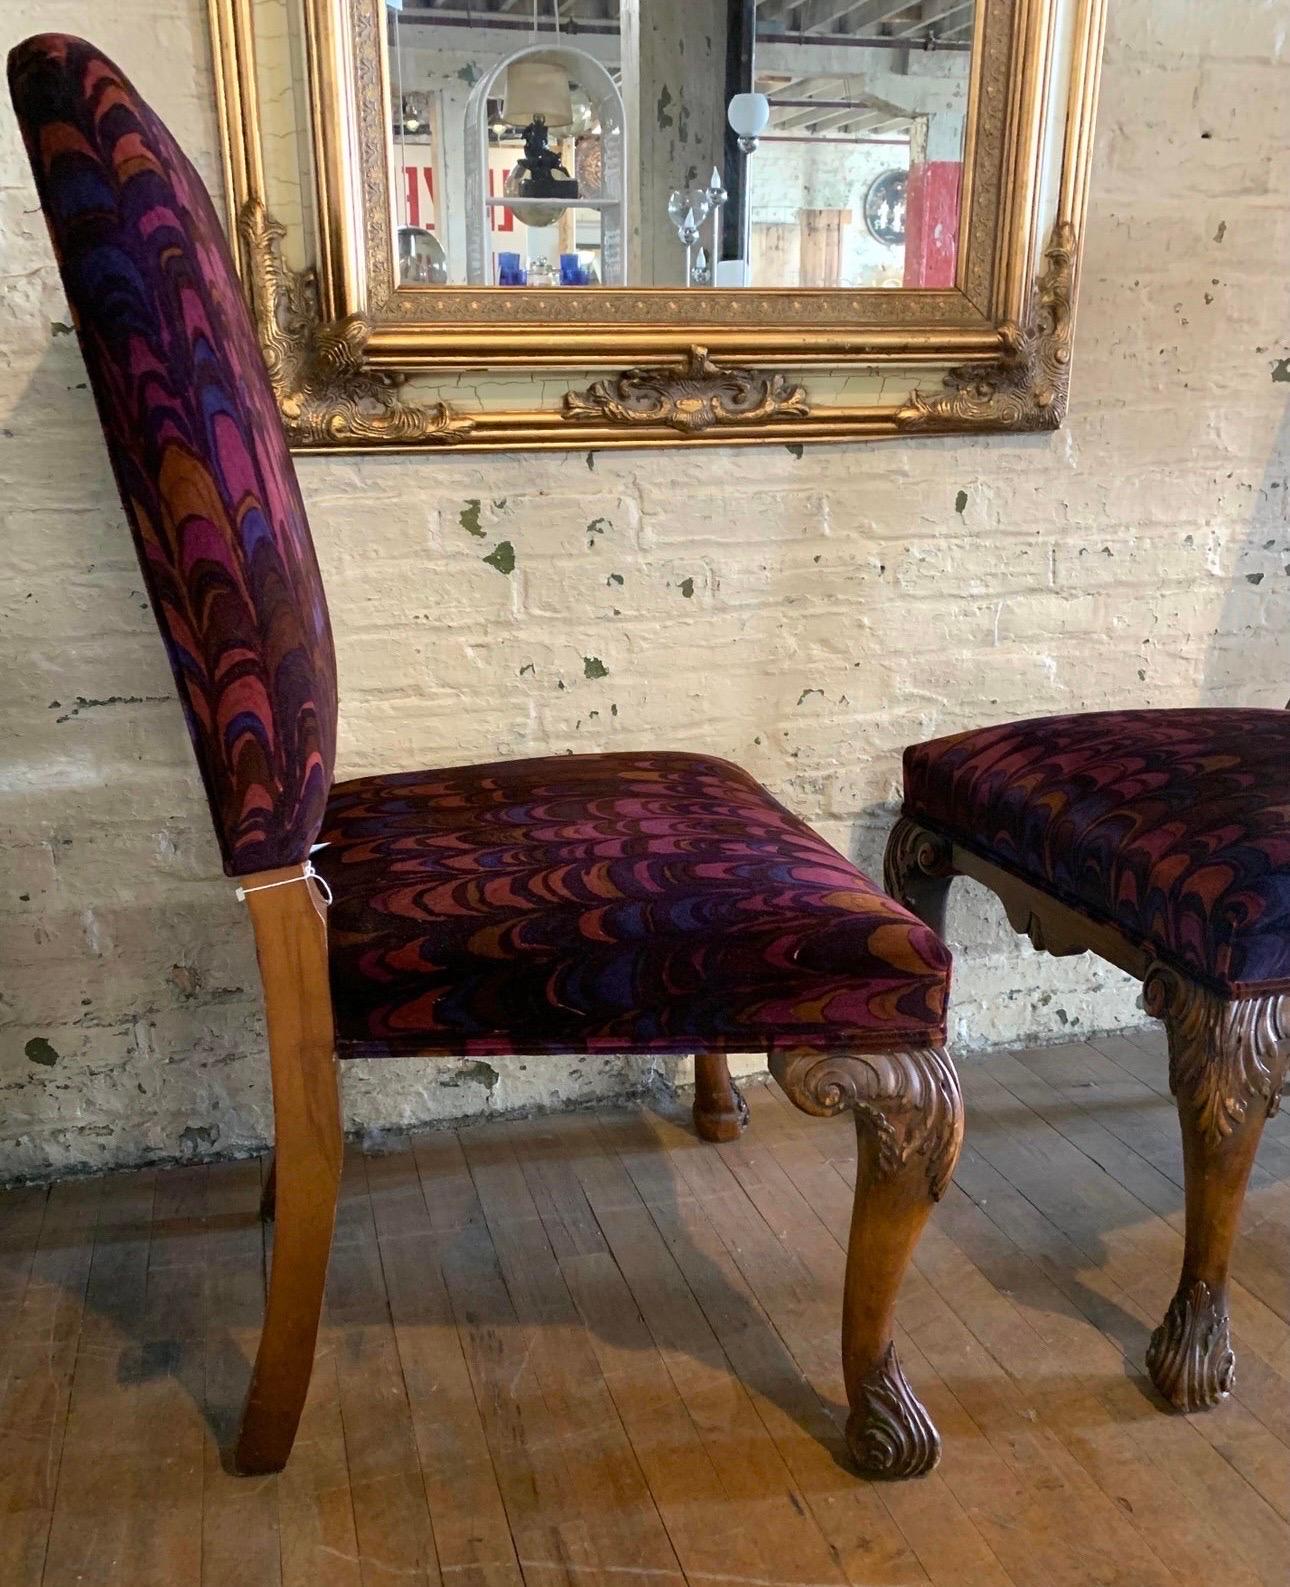 Vintage antique side chairs upholstered in Jack Lenor Larson fabric. Fabric a color combination of: royal blue, purple, burgundy, rust and orange. Fabric is still soft and bright. Some wear on legs and back of chairs but no holes, large scratches or